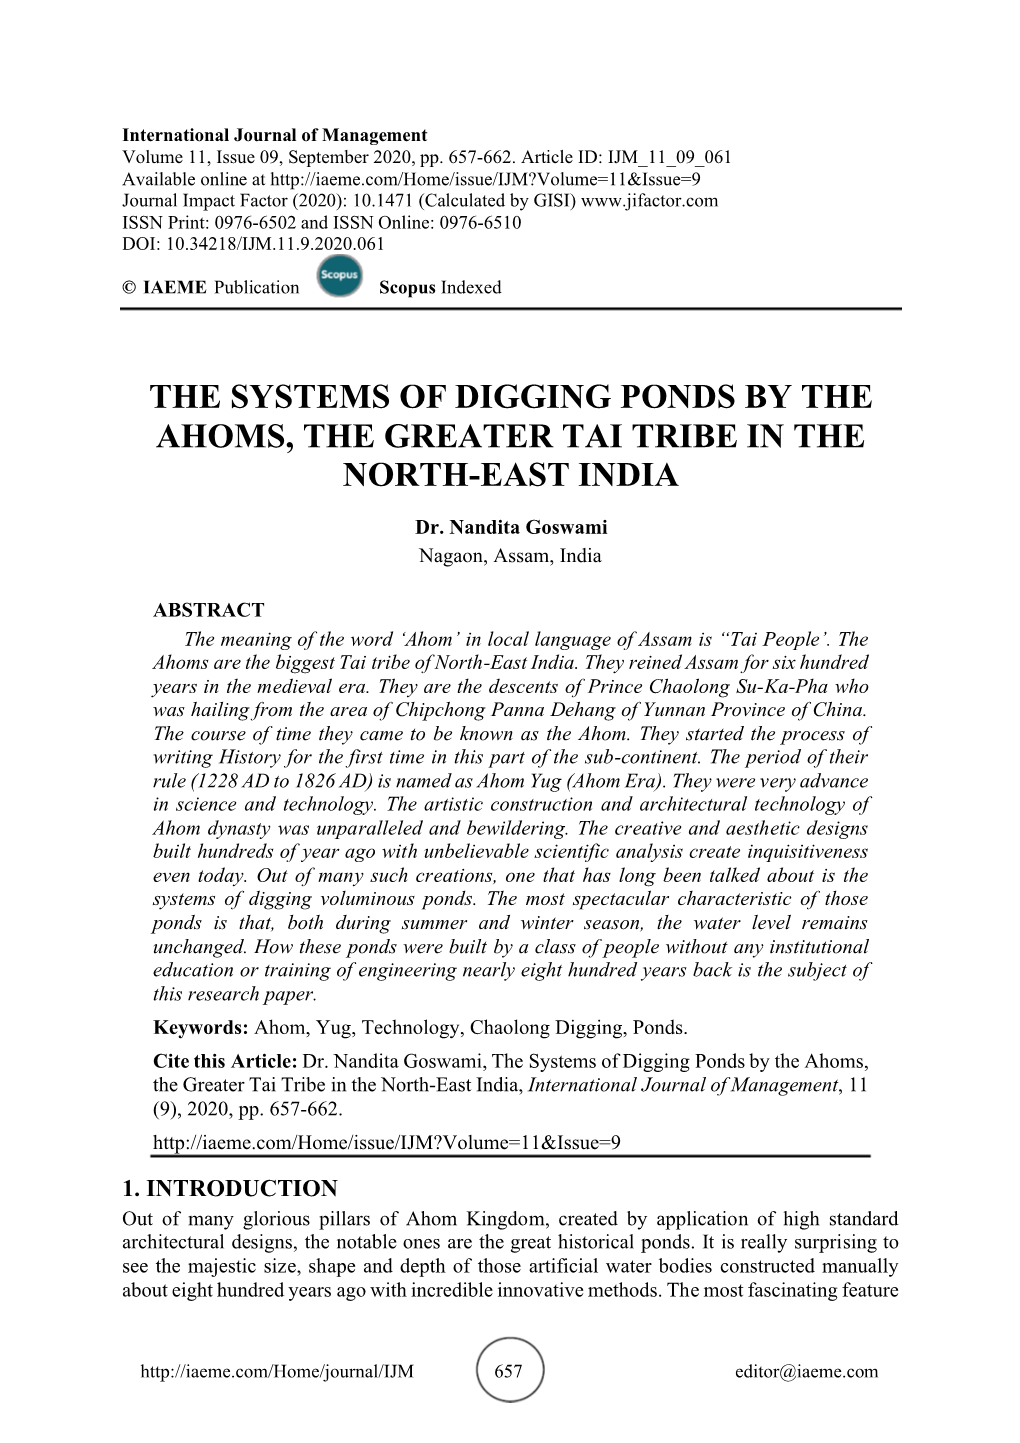 The Systems of Digging Ponds by the Ahoms, the Greater Tai Tribe in the North-East India